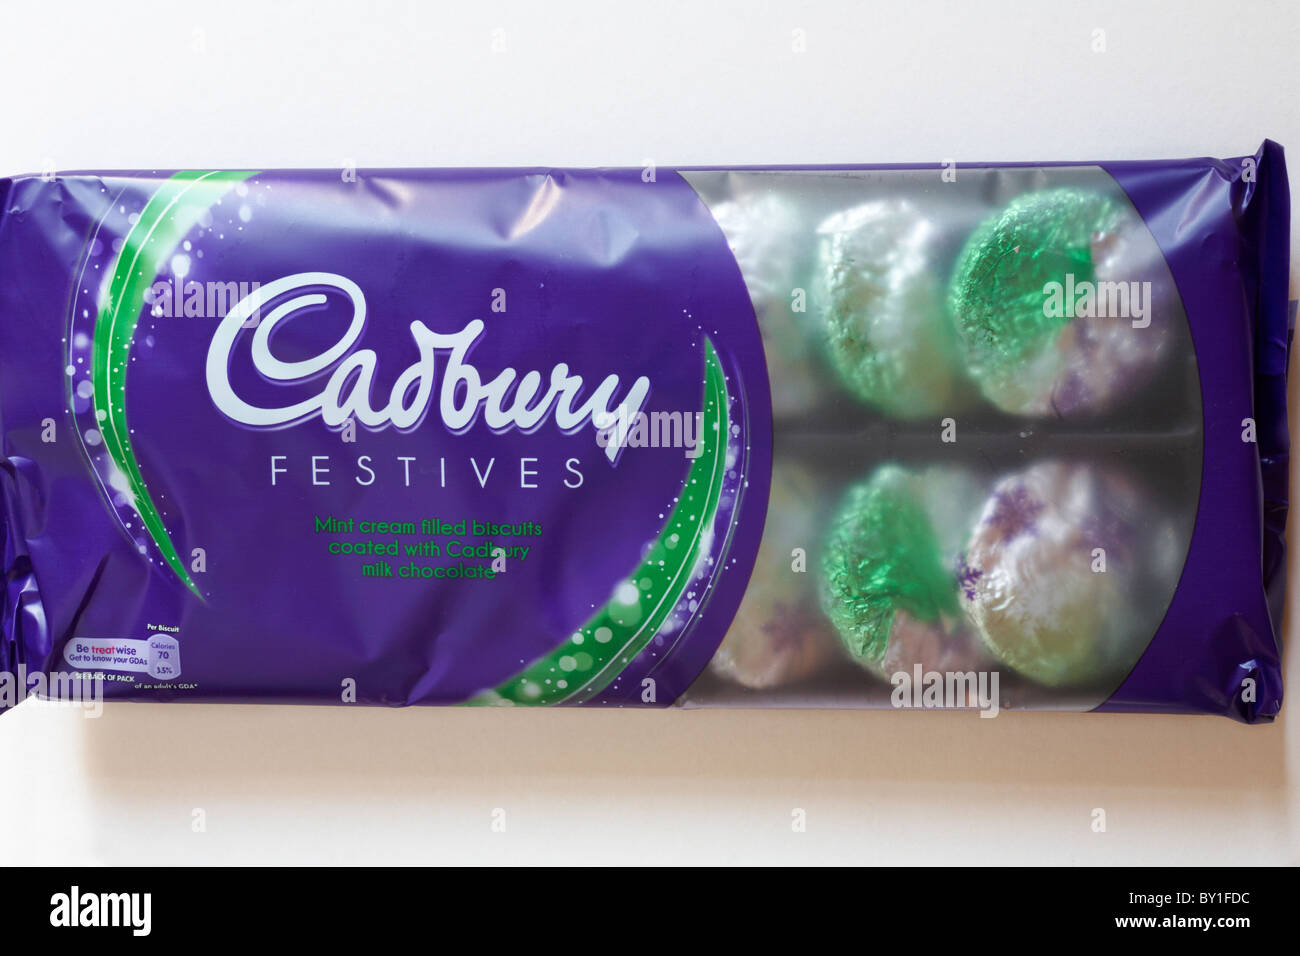 Packet of Cadbury Festives mint flavour biscuits isolated on white background Stock Photo